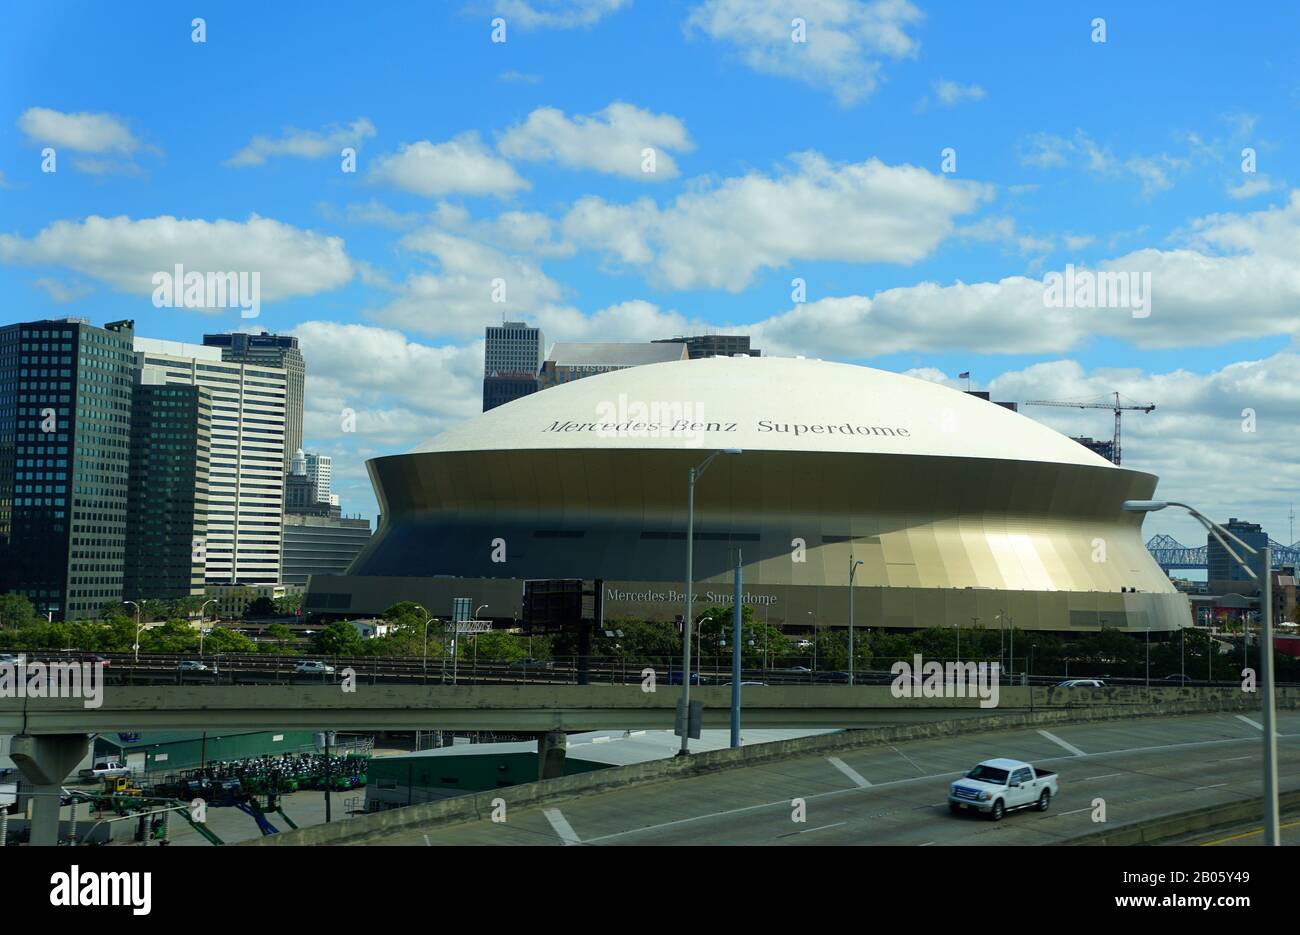 New Orleans, Louisiana, U.S.A - February 4, 2020 - The view of Superdome on Sugar Bowl Drive Stock Photo